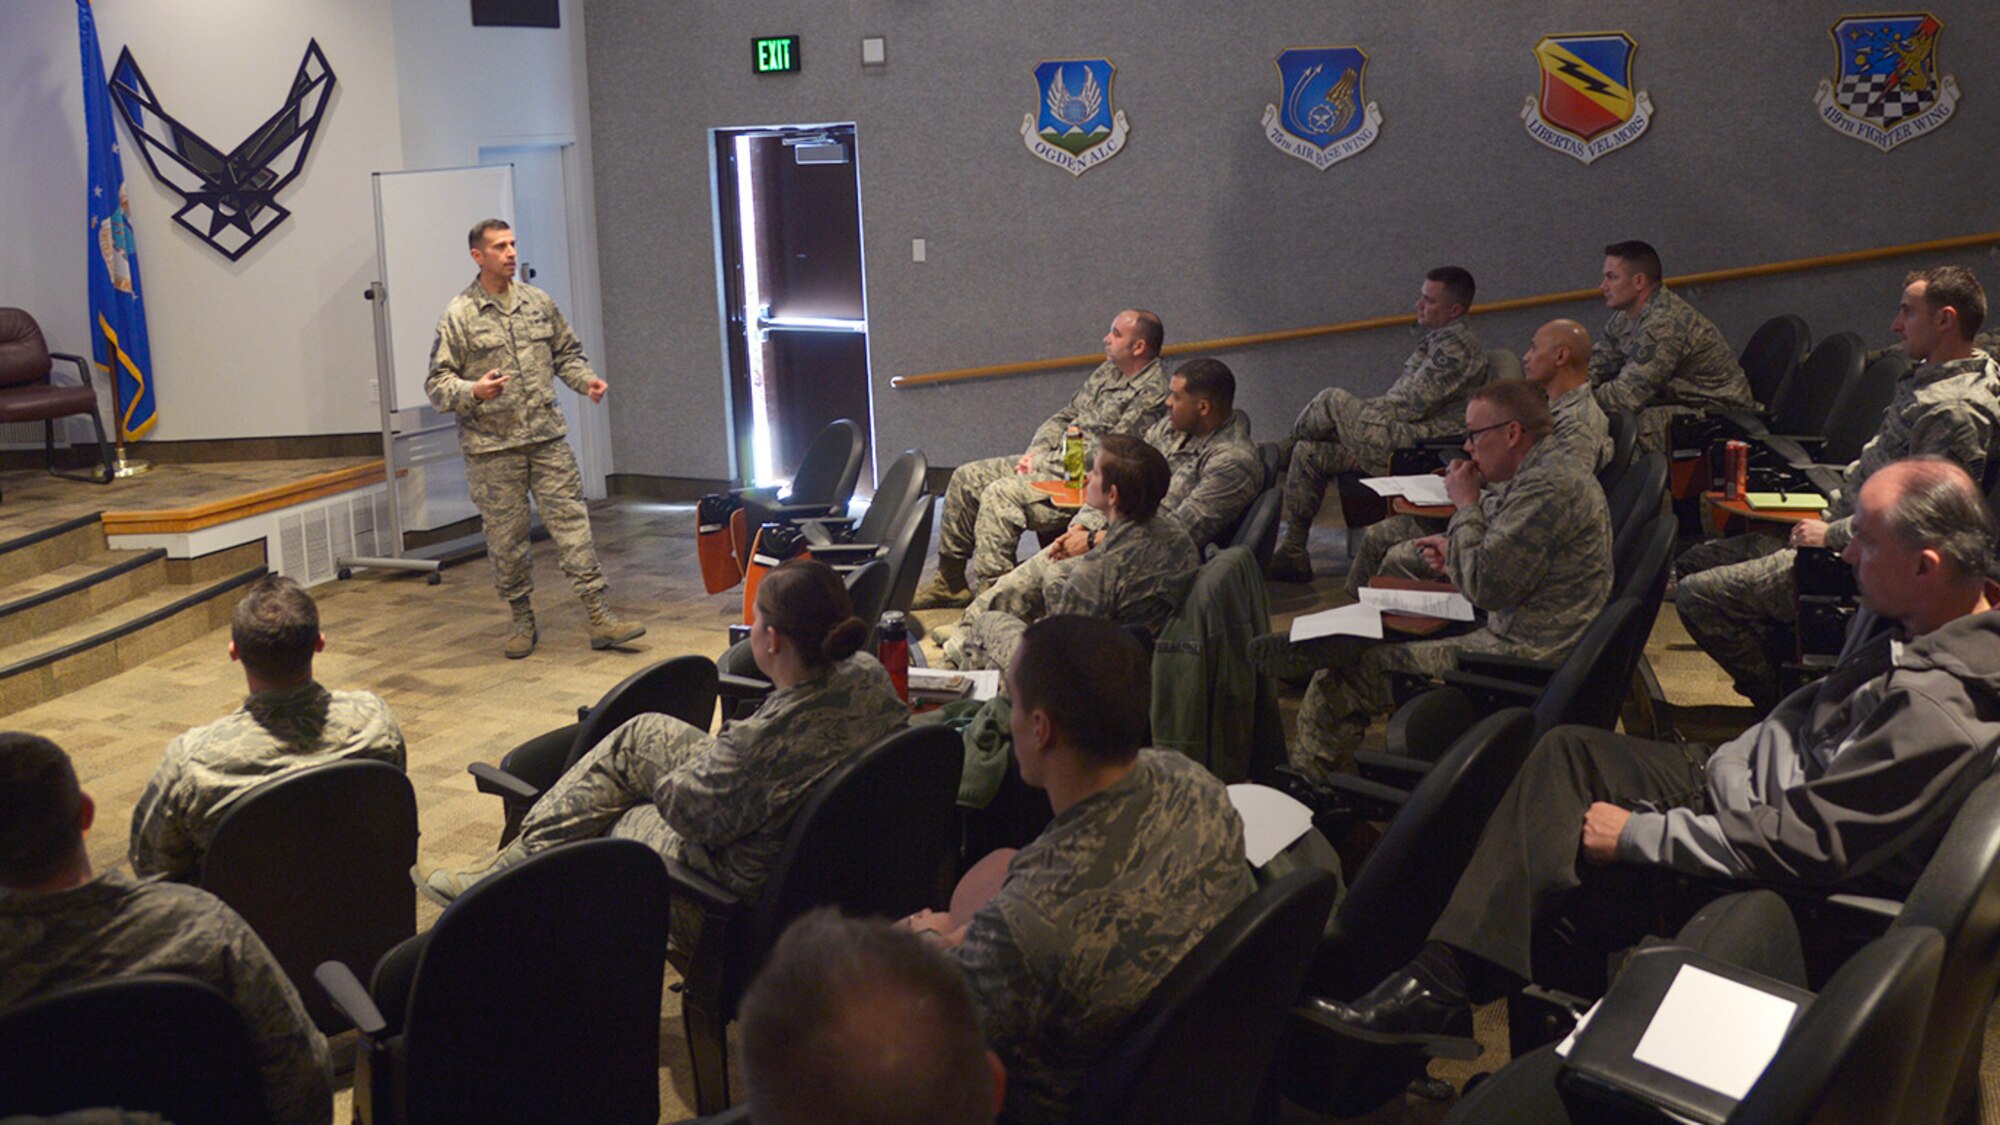 Master Sgt. Manny Ramirez speaks during a new Flight Commander's Course, Hill Air Force Base, Utah, March 7, 2018. Developed locally by wing, group and squadron leadership, the first-ever session was attended by veteran flight commanders from across base who were charged with evaluating and providing feedback about the training curriculum. The course will be offered twice a year. (U.S. Air Force photo by Airman 1st Class James Kennedy)